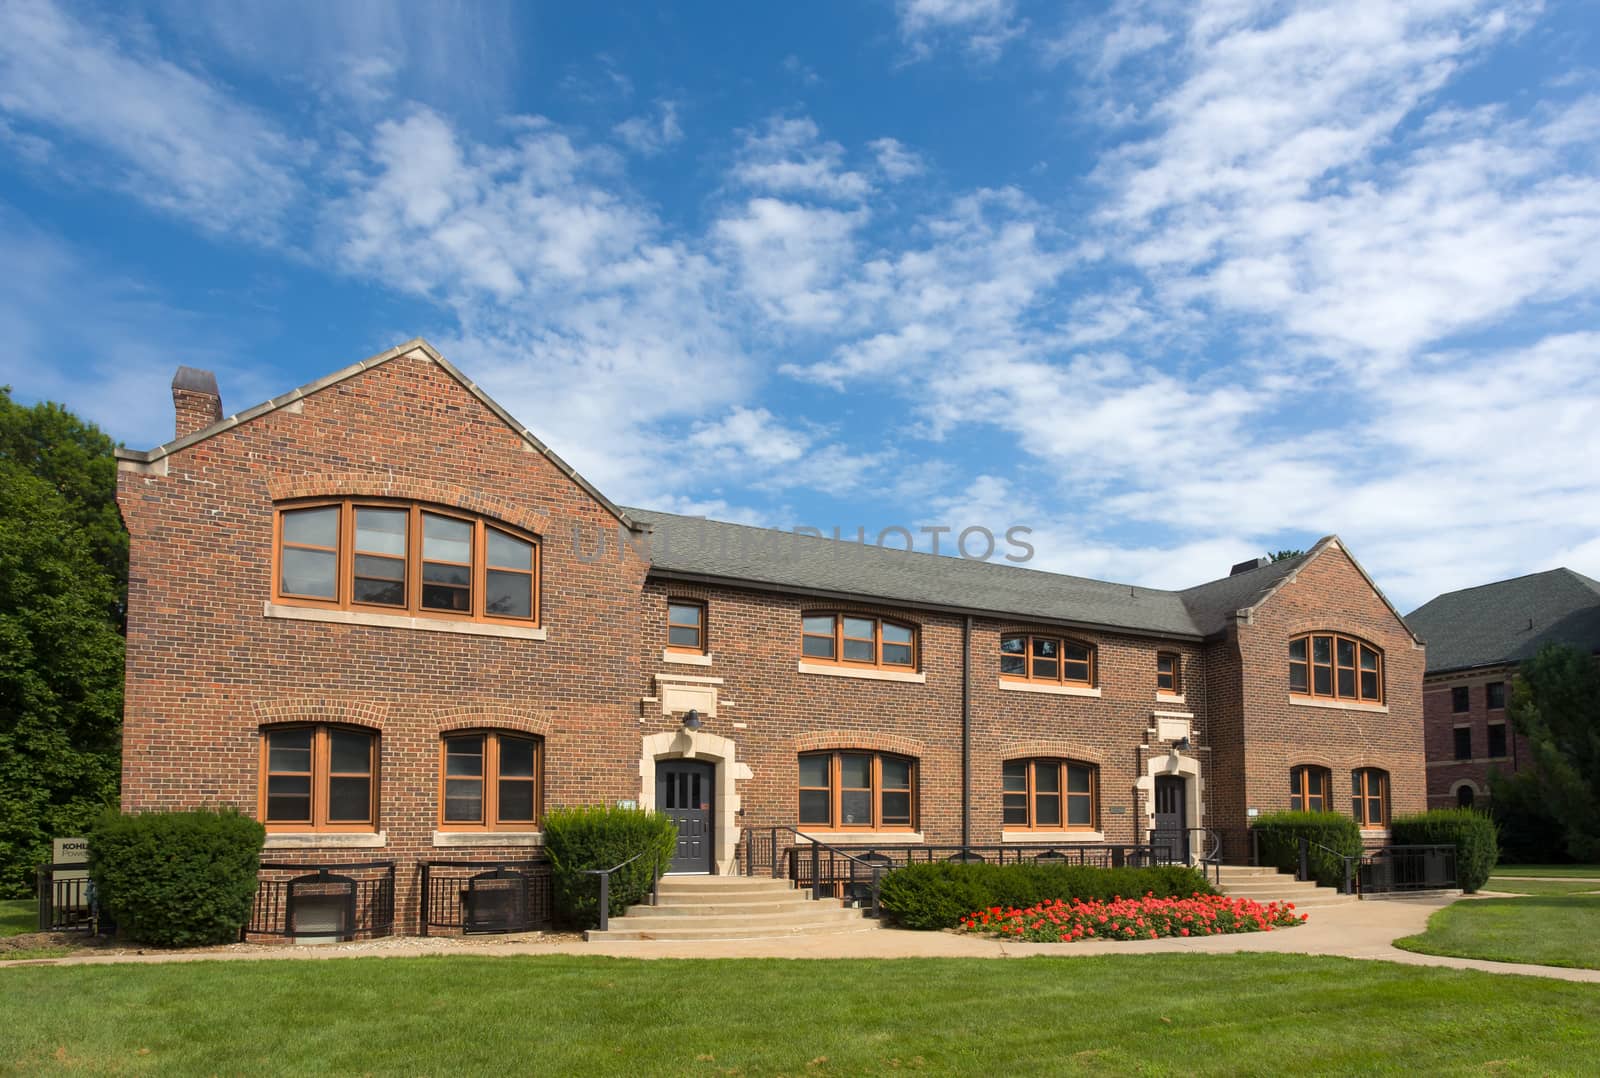 GRINNELL, IA/USA - AUGUST 8, 2015: Steiner Hall on the campus of Grinell College. Grinnell College is a private liberal arts college  known for its rigorous academics and tradition of social responsibility.